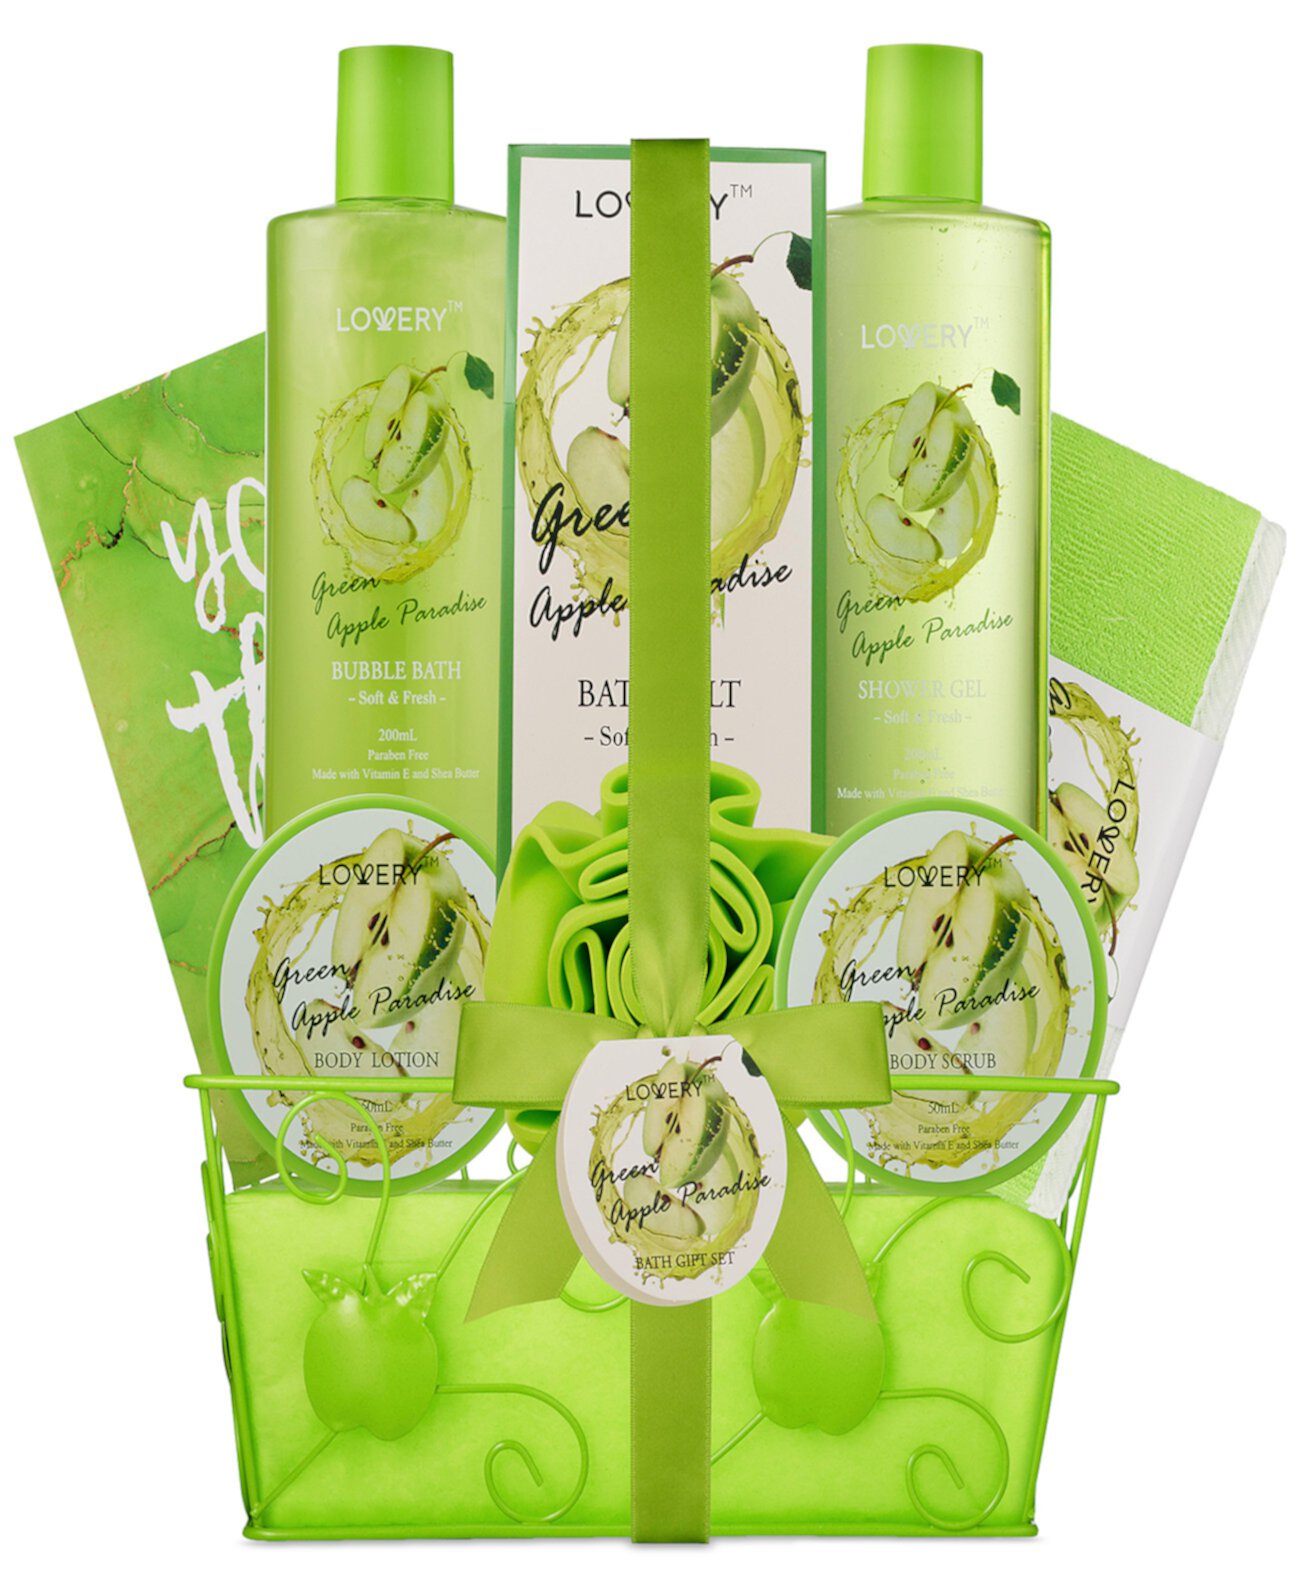 9-Pc. Green Apple Paradise Body Care Gift Set Lovery